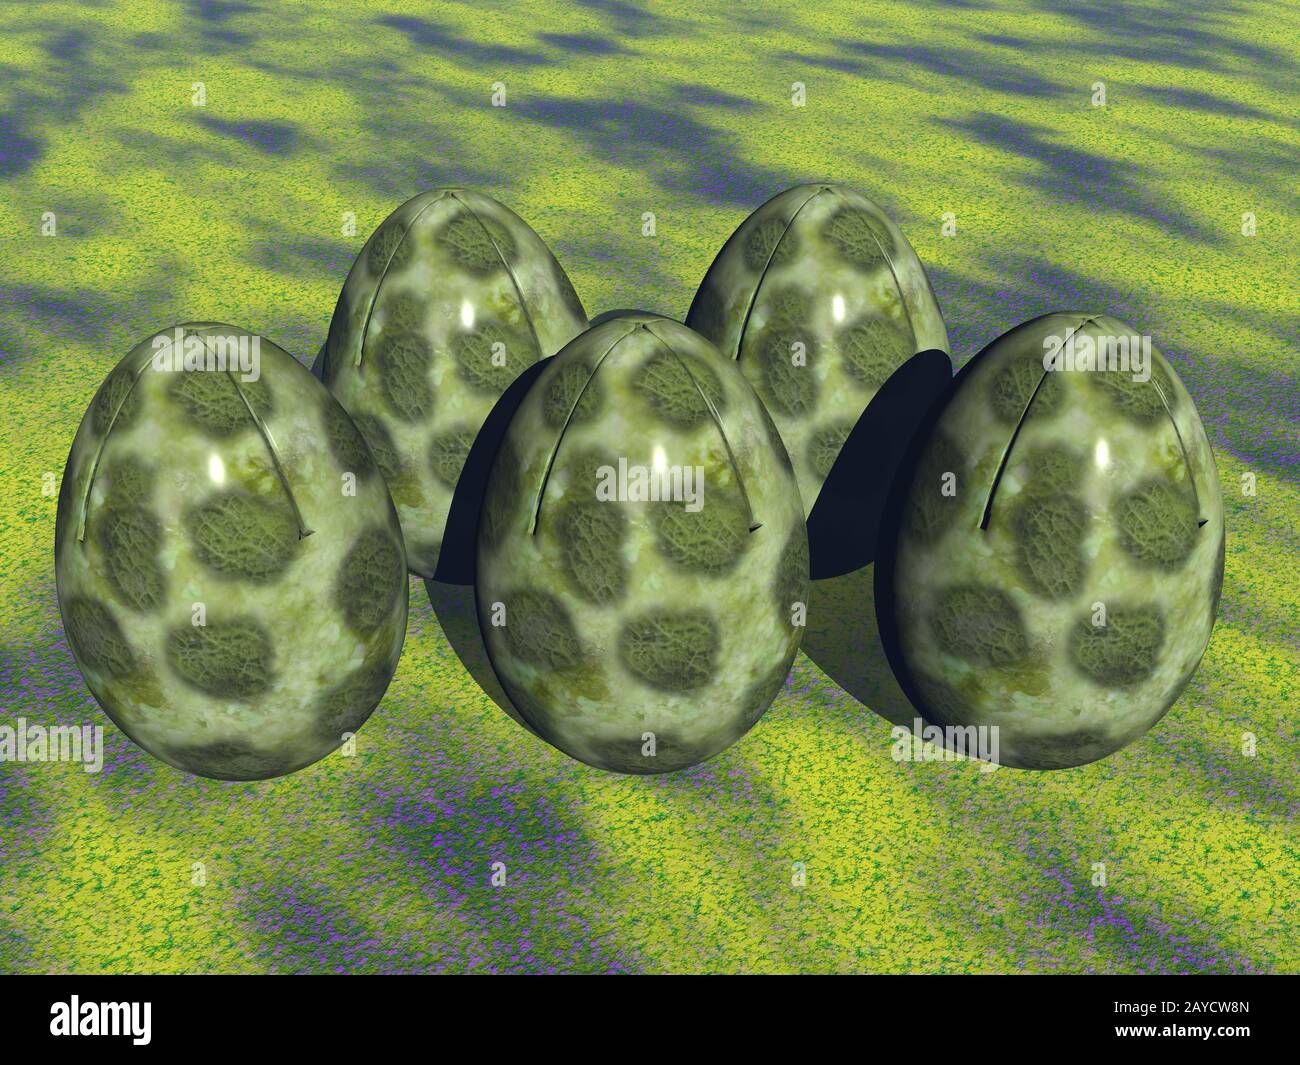 green spotted alien eggs Stock Photo